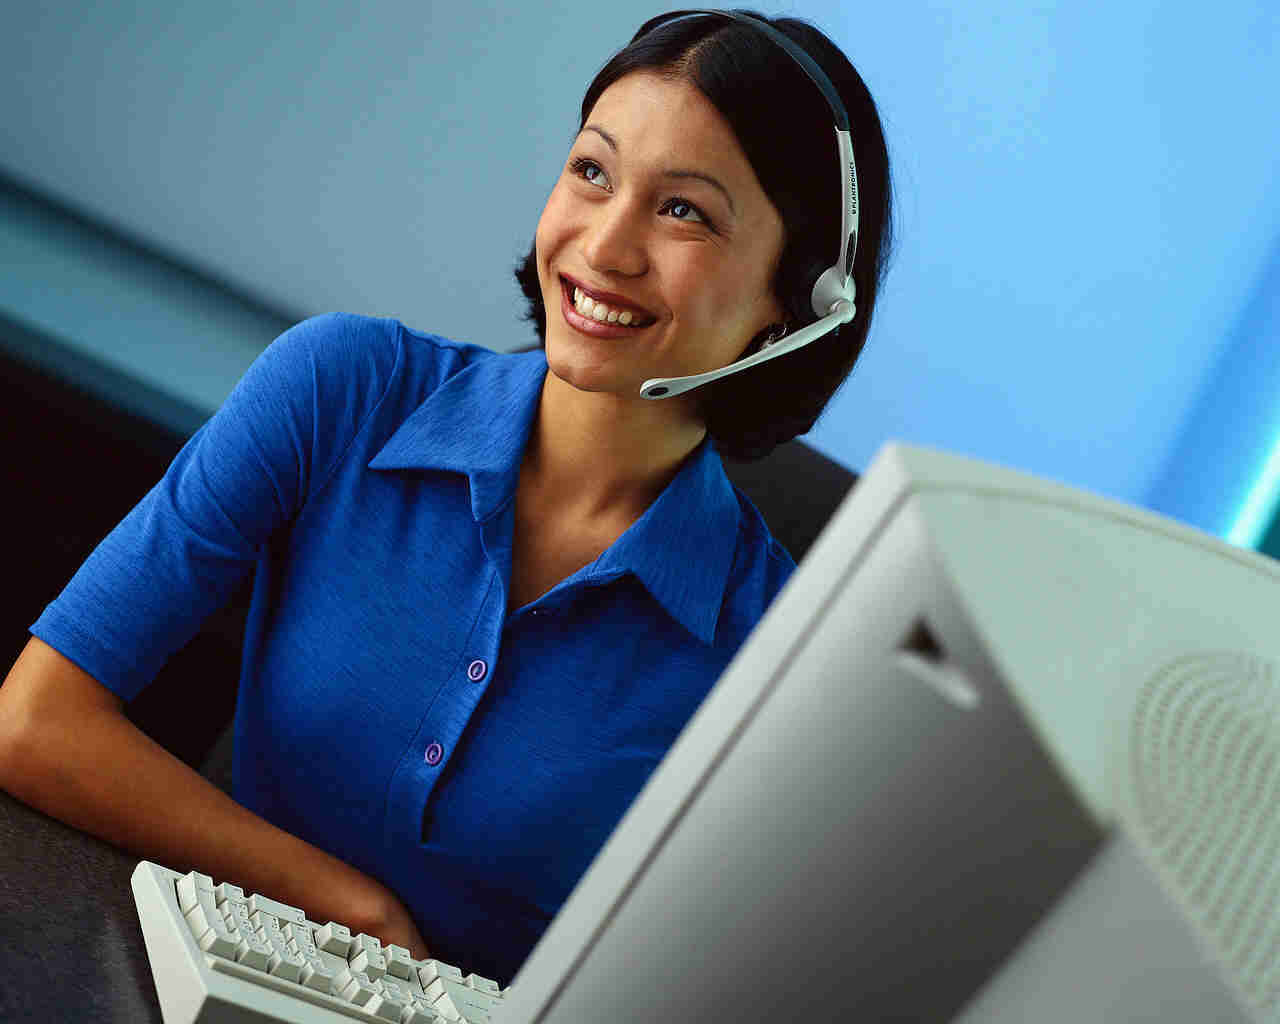 Conference Call Questions - Call us for Conference calls comparisons to ATT